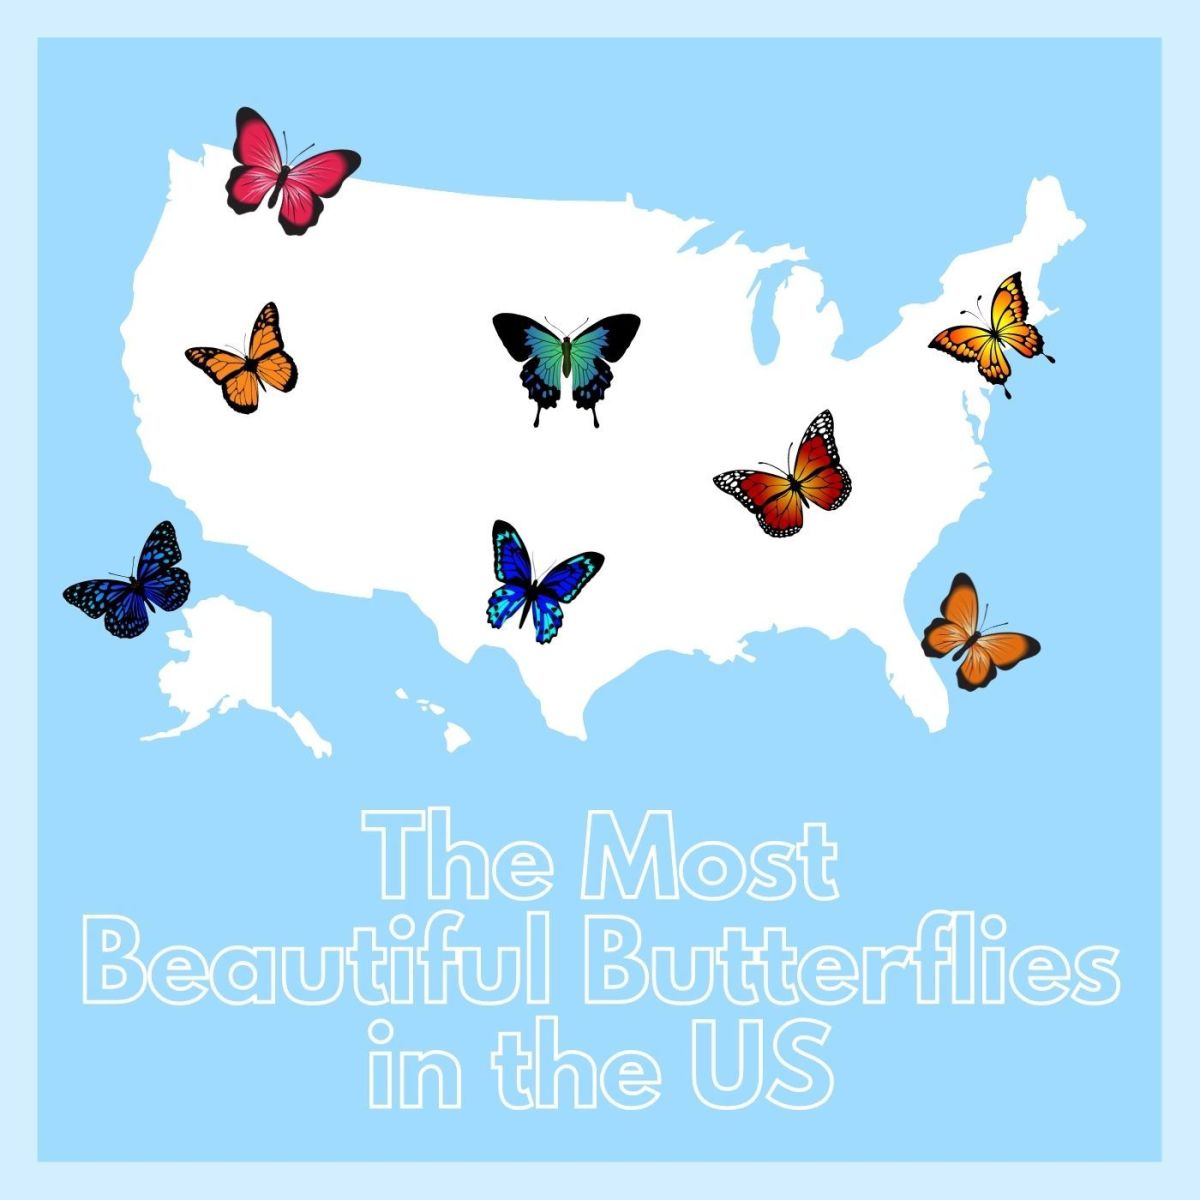 Butterflies are the most beautiful creatures in the world. 